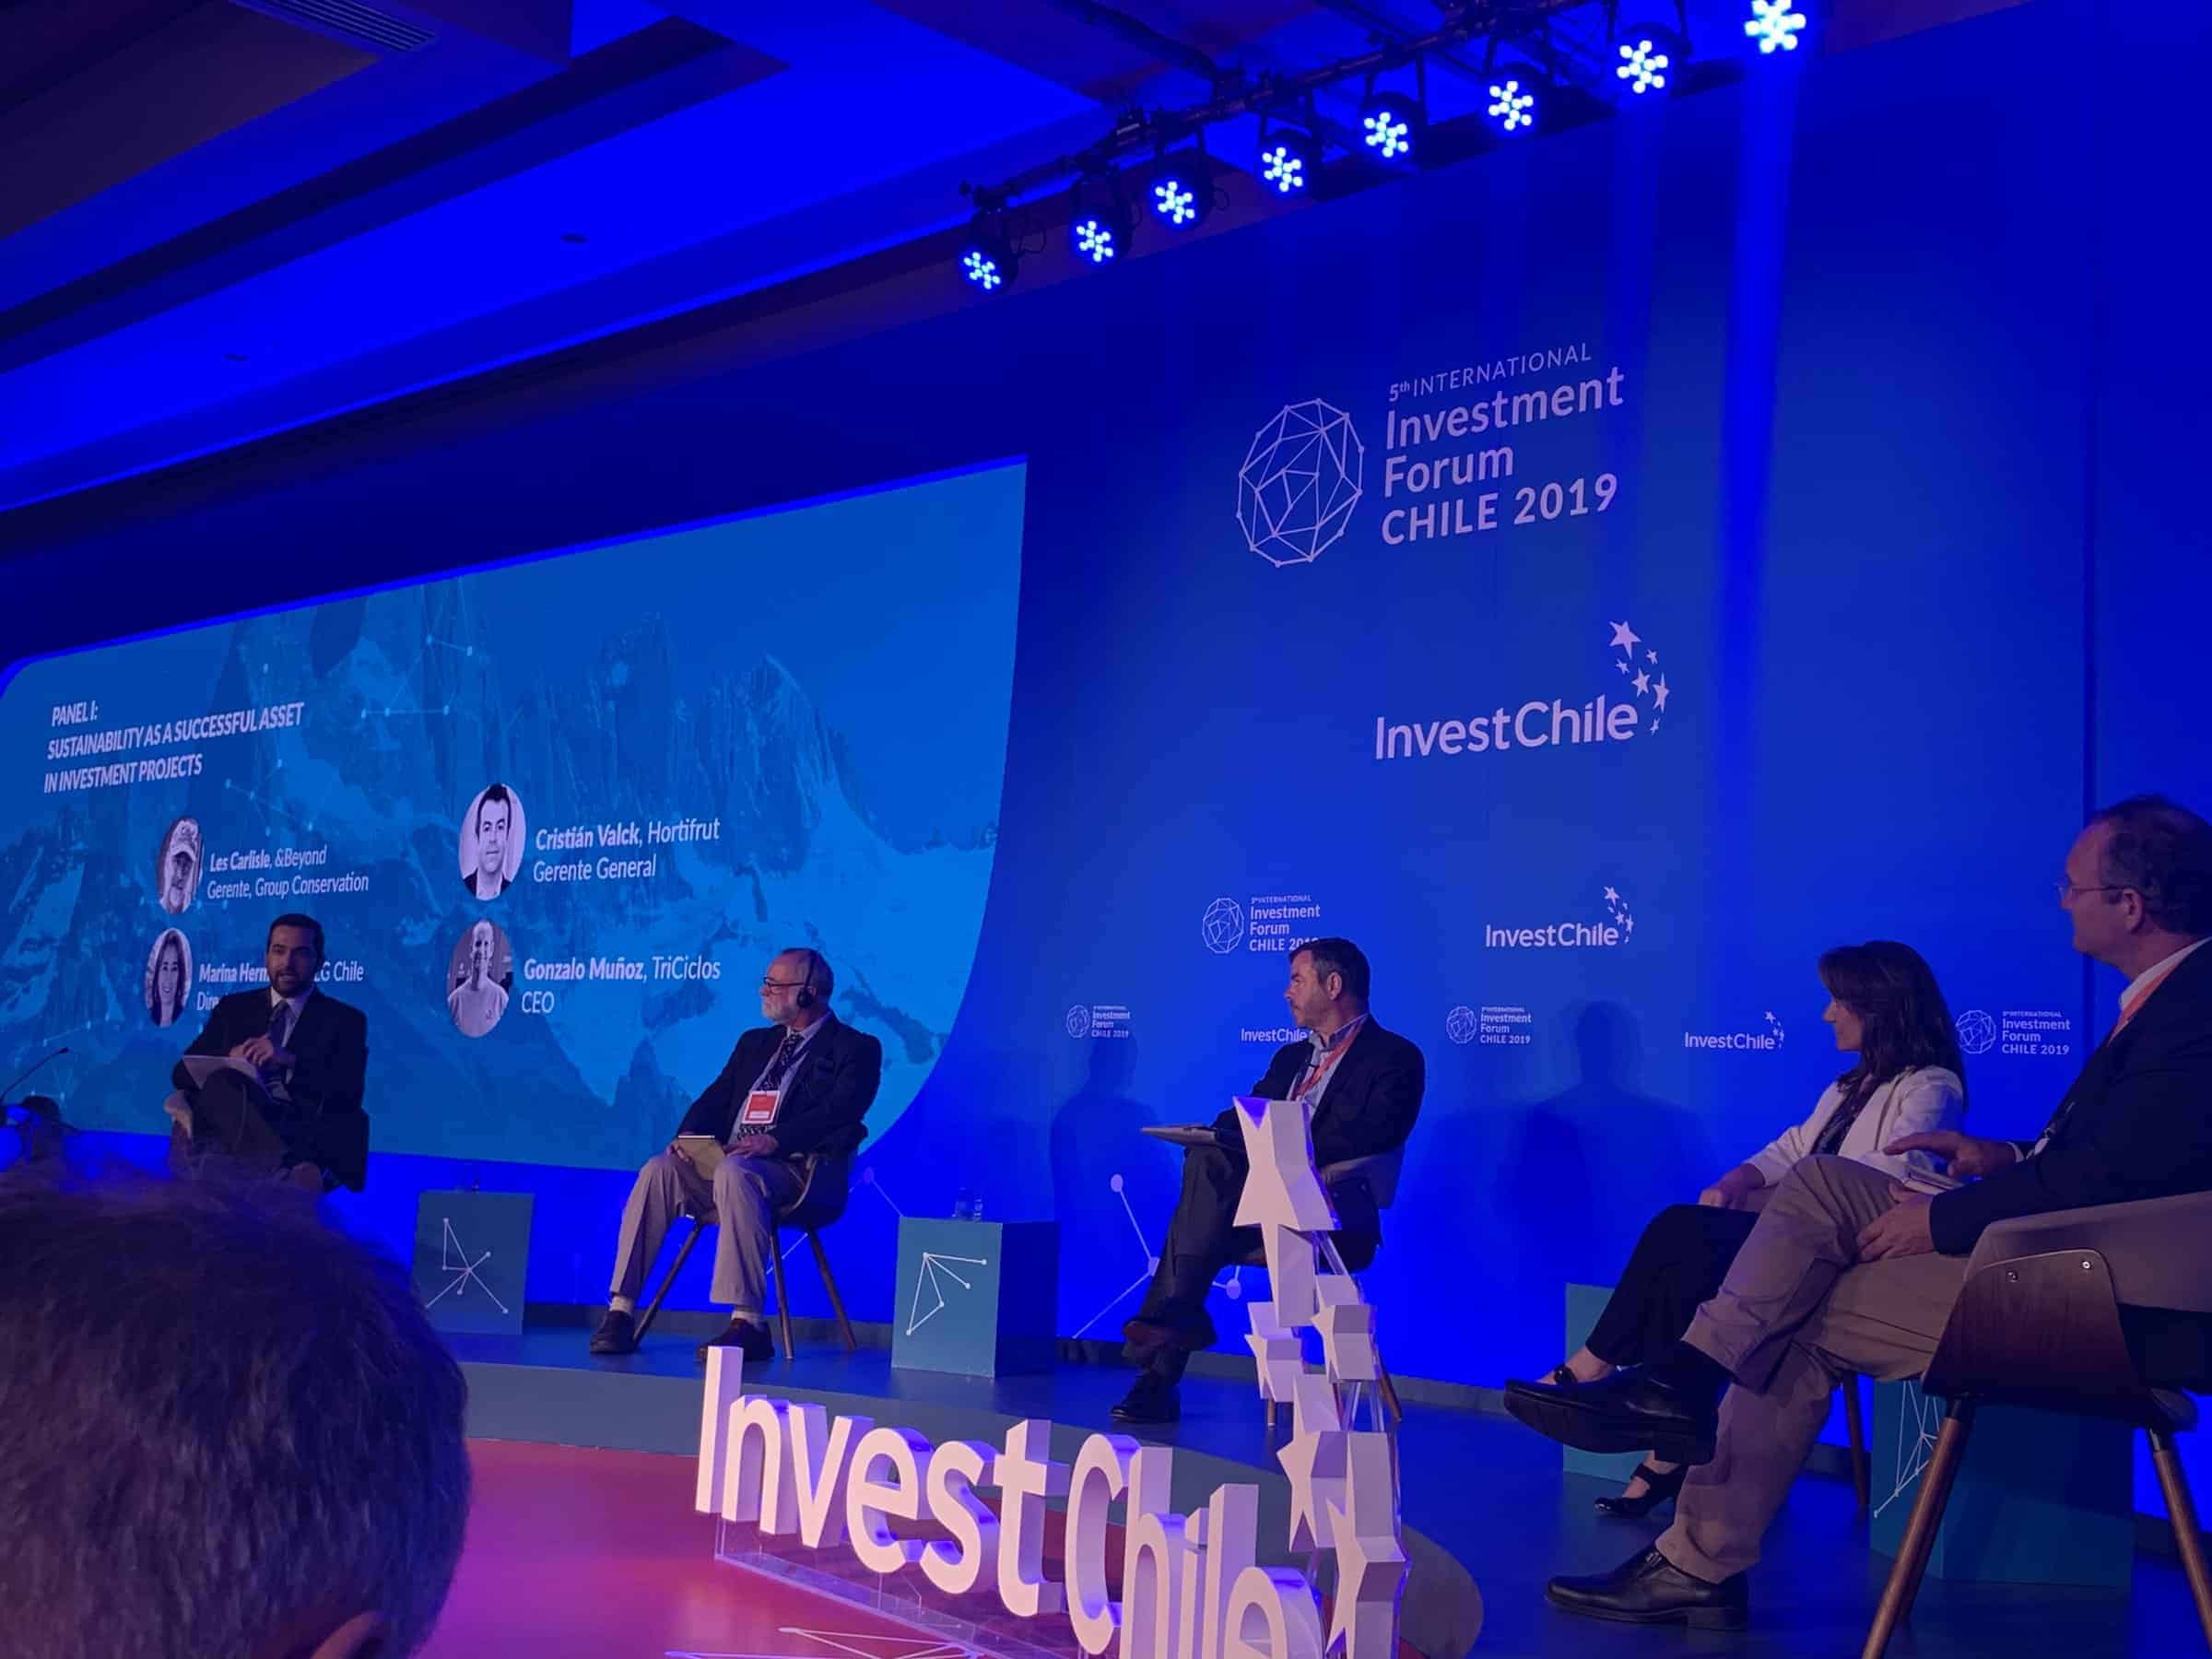 Investors Discuss The Future Of Latam Startups At 5th Annual International Investment Forum In Chile